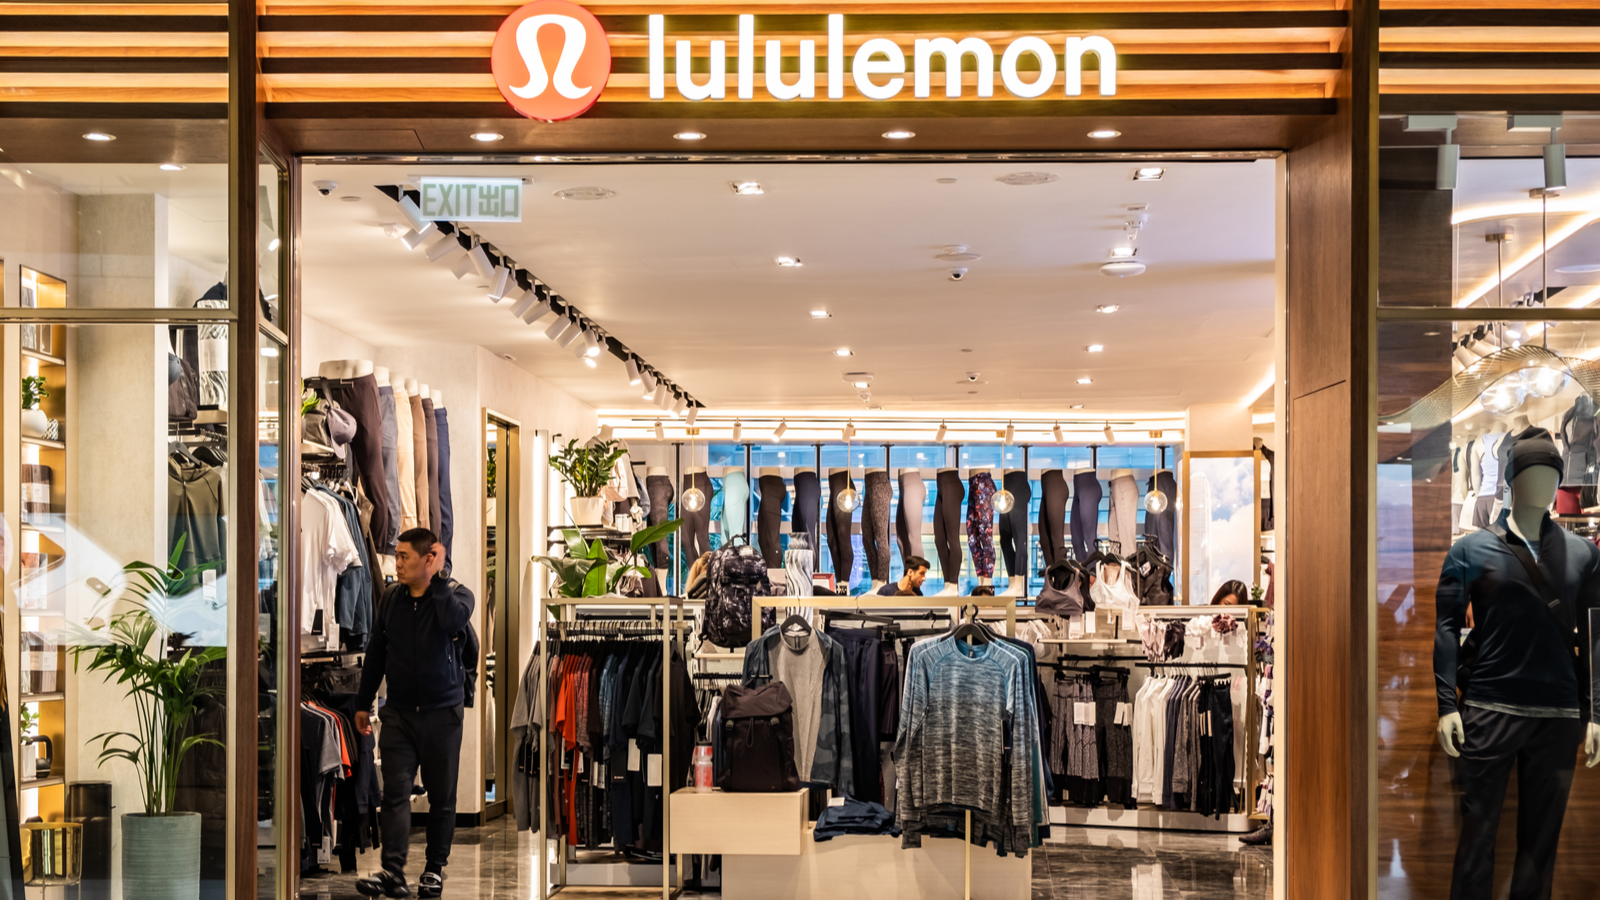 Lululemon storefront in a mall. People shop inside the store among the clothes. LULU stock.